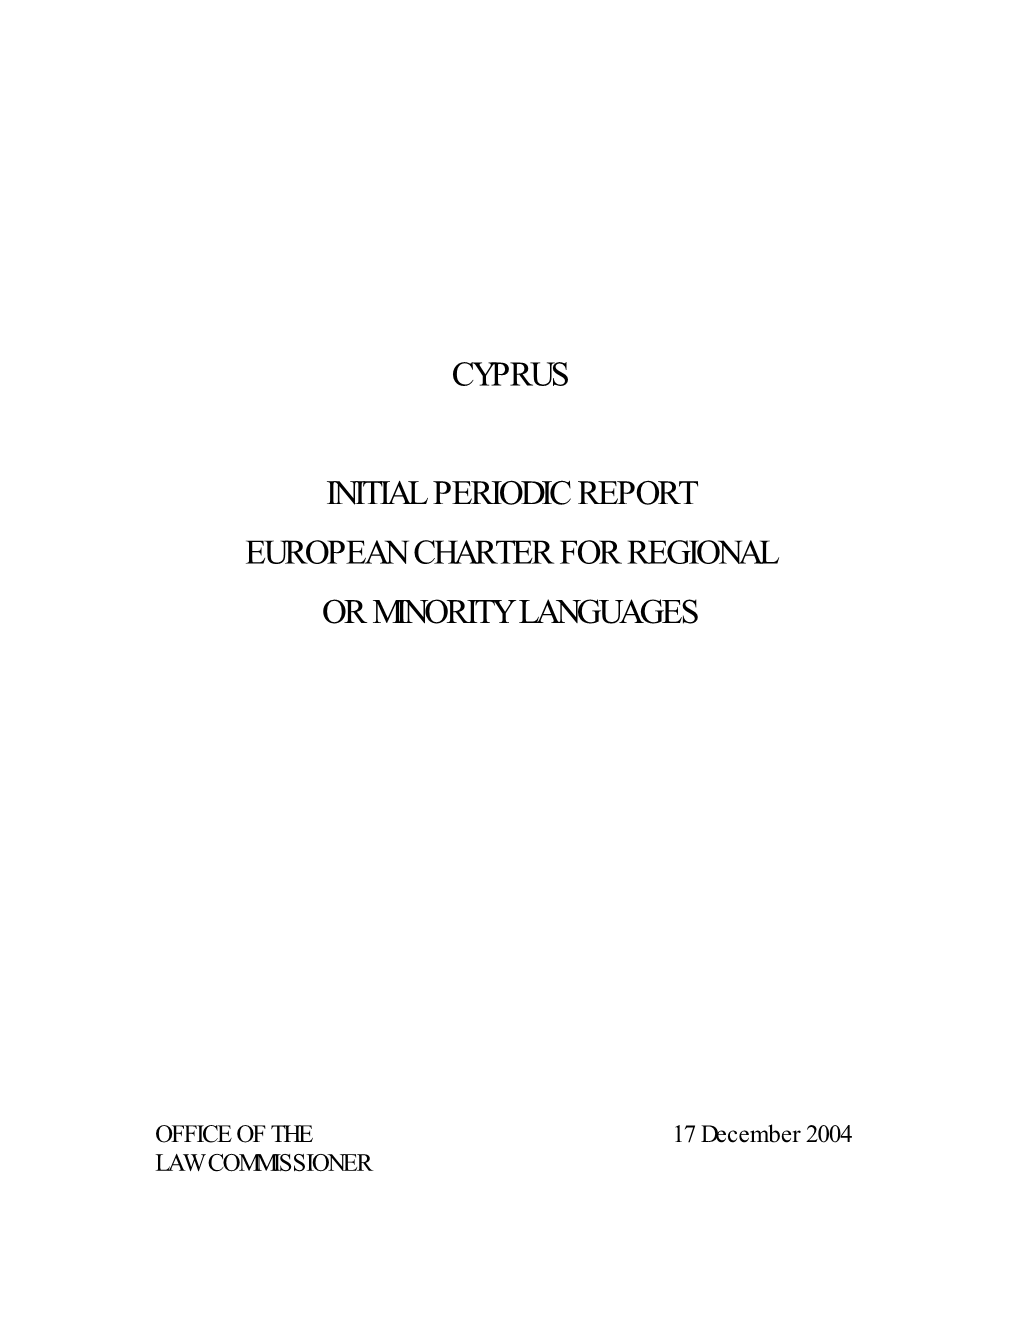 Cyprus Initial Periodic Report European Charter For